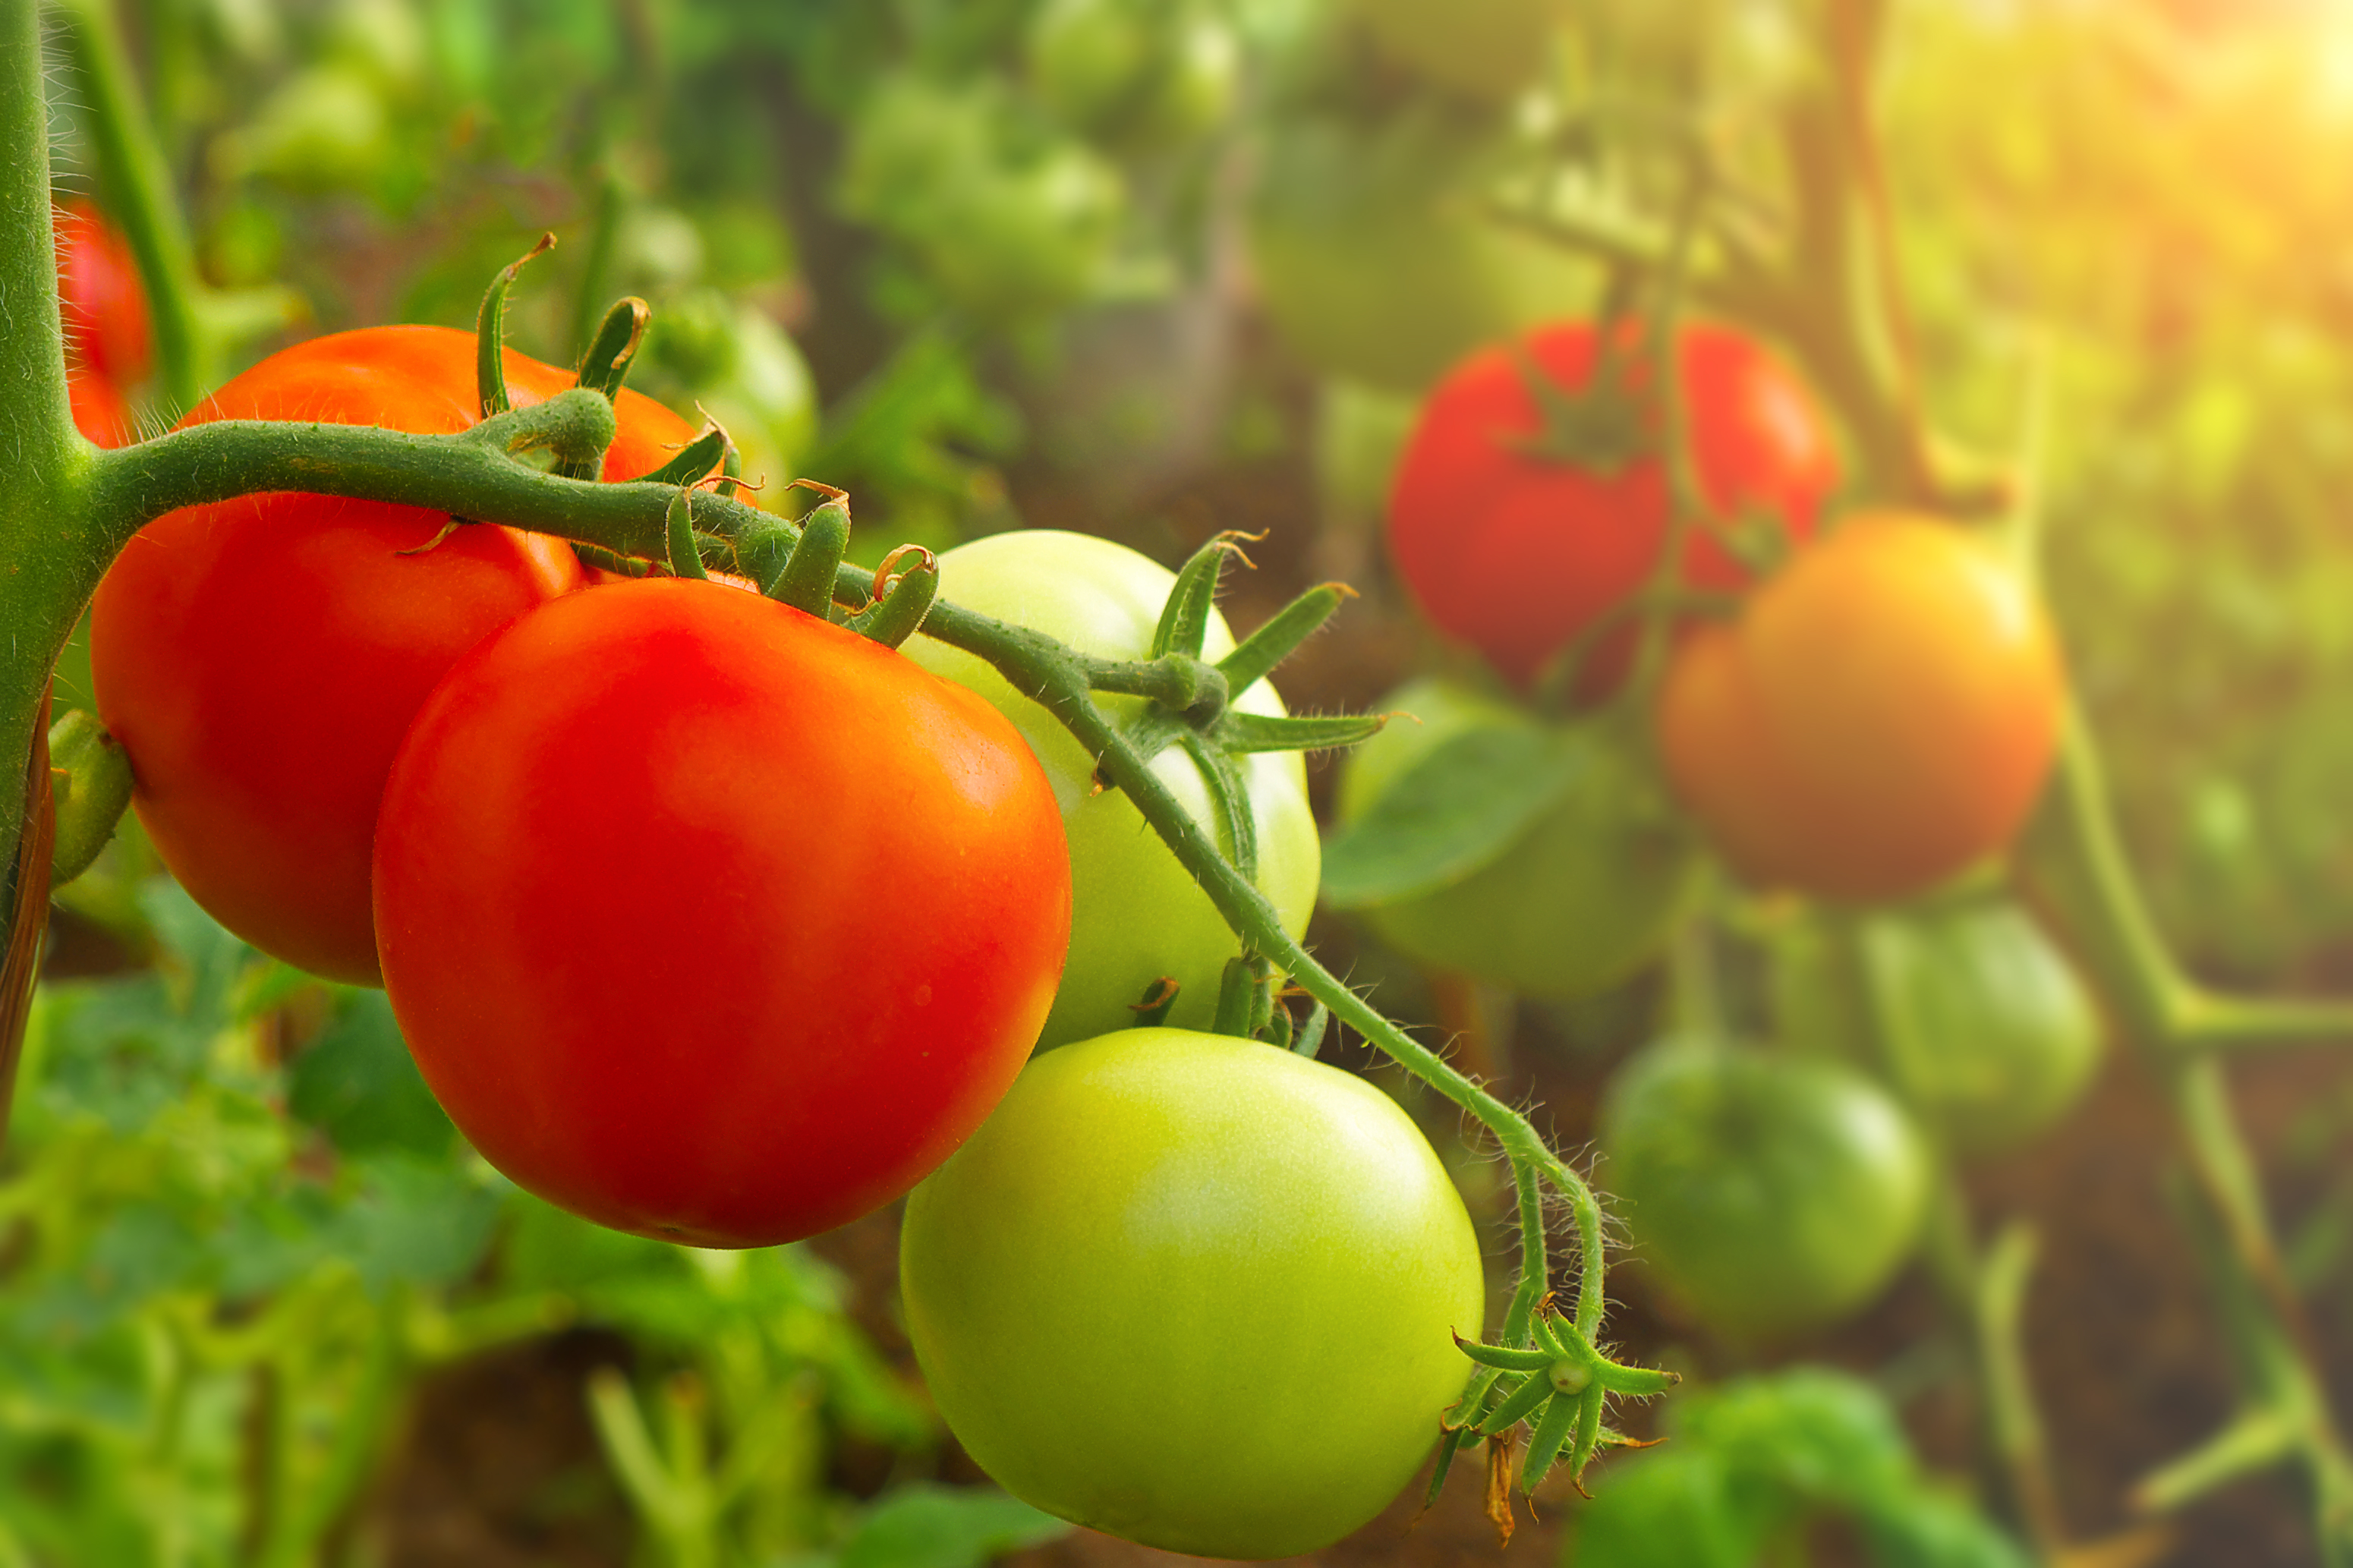 https://www.freshpoint.com/wp-content/uploads/2019/07/freshpoint-produce-101-tomatoes-red.jpg